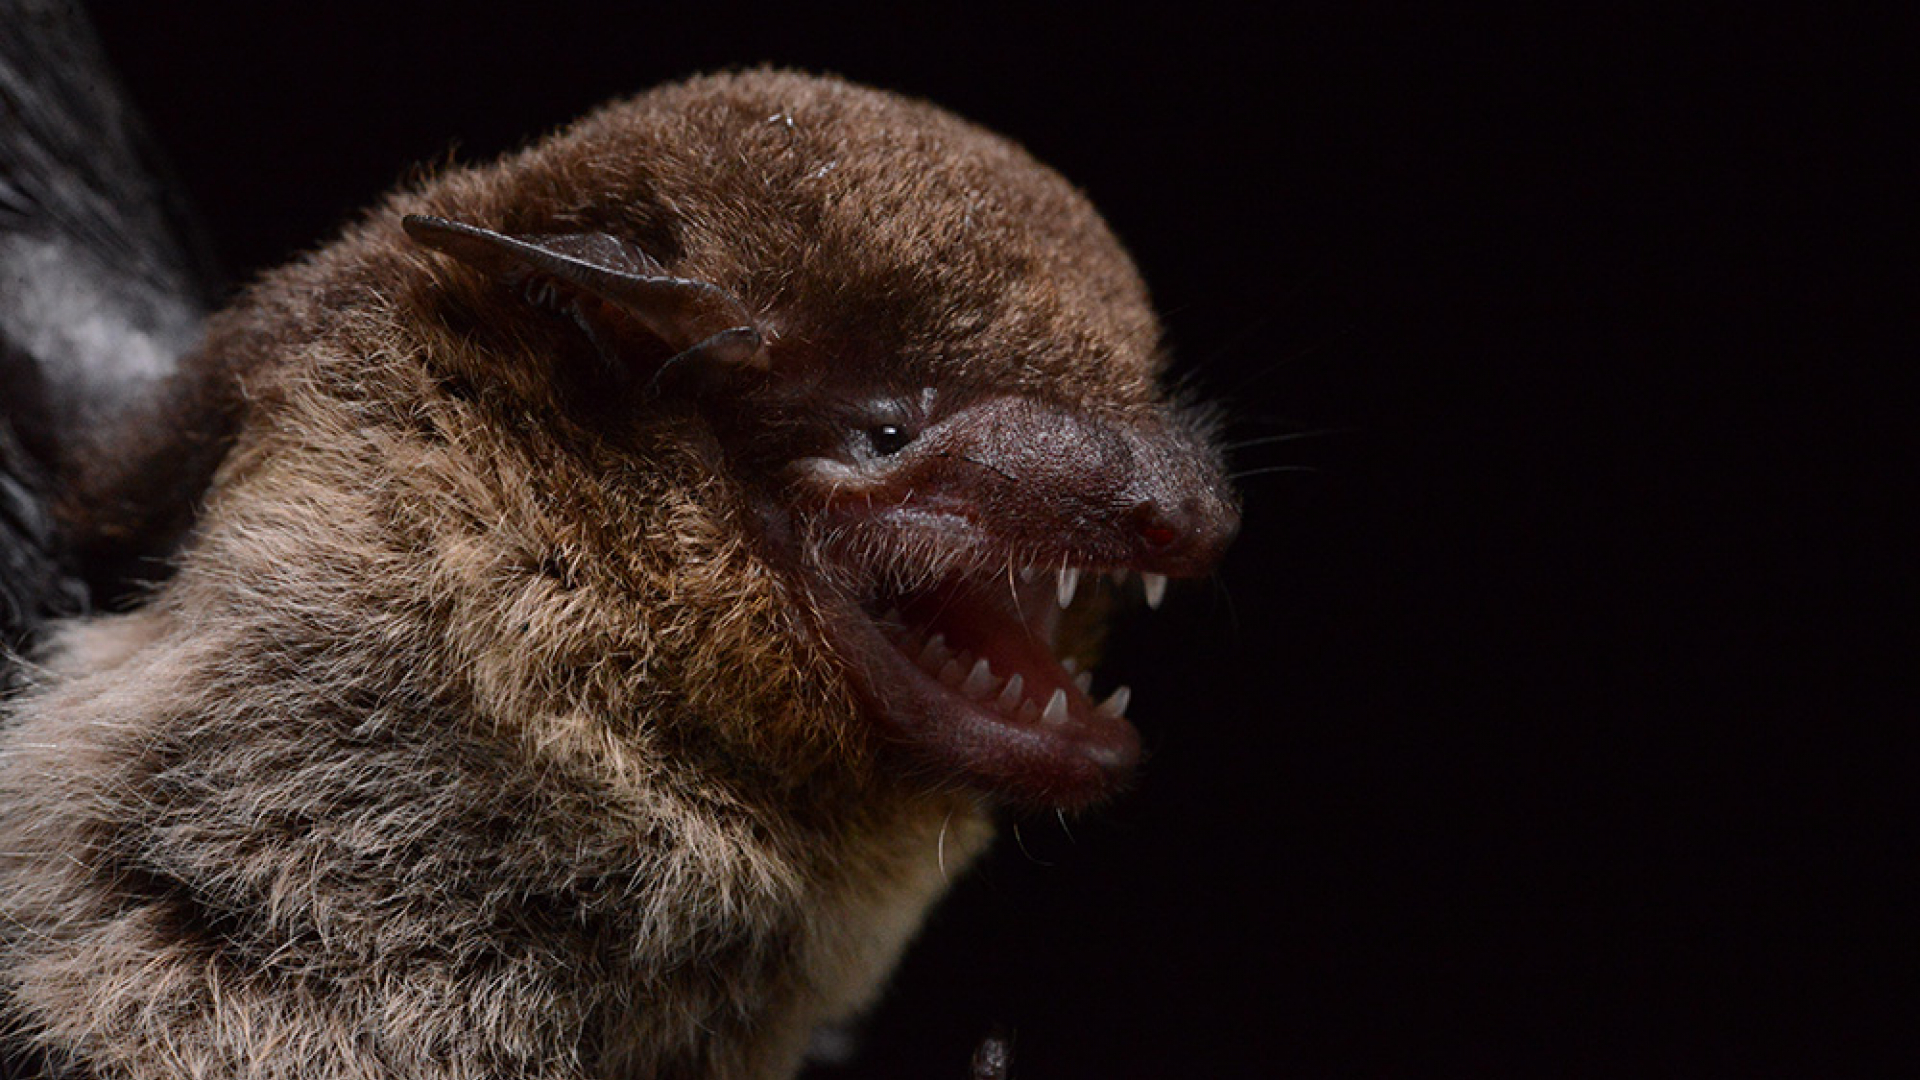 Profile of the brown bat's face.